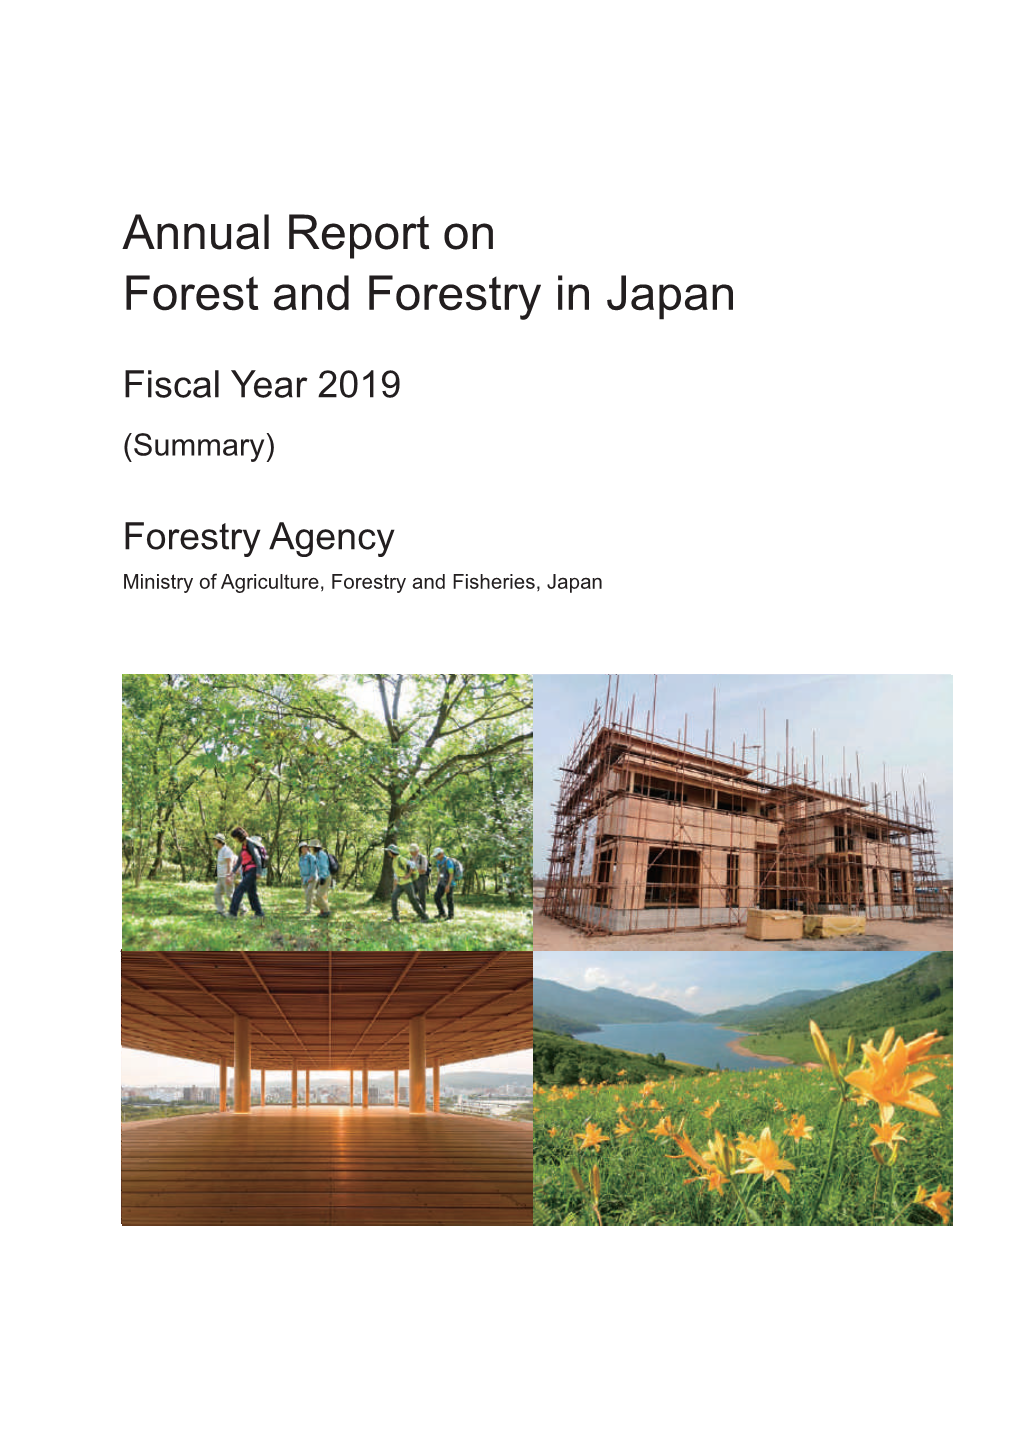 Annual Report on Forest and Forestry in Japan (FY 2019）(PDF : 3620KB)